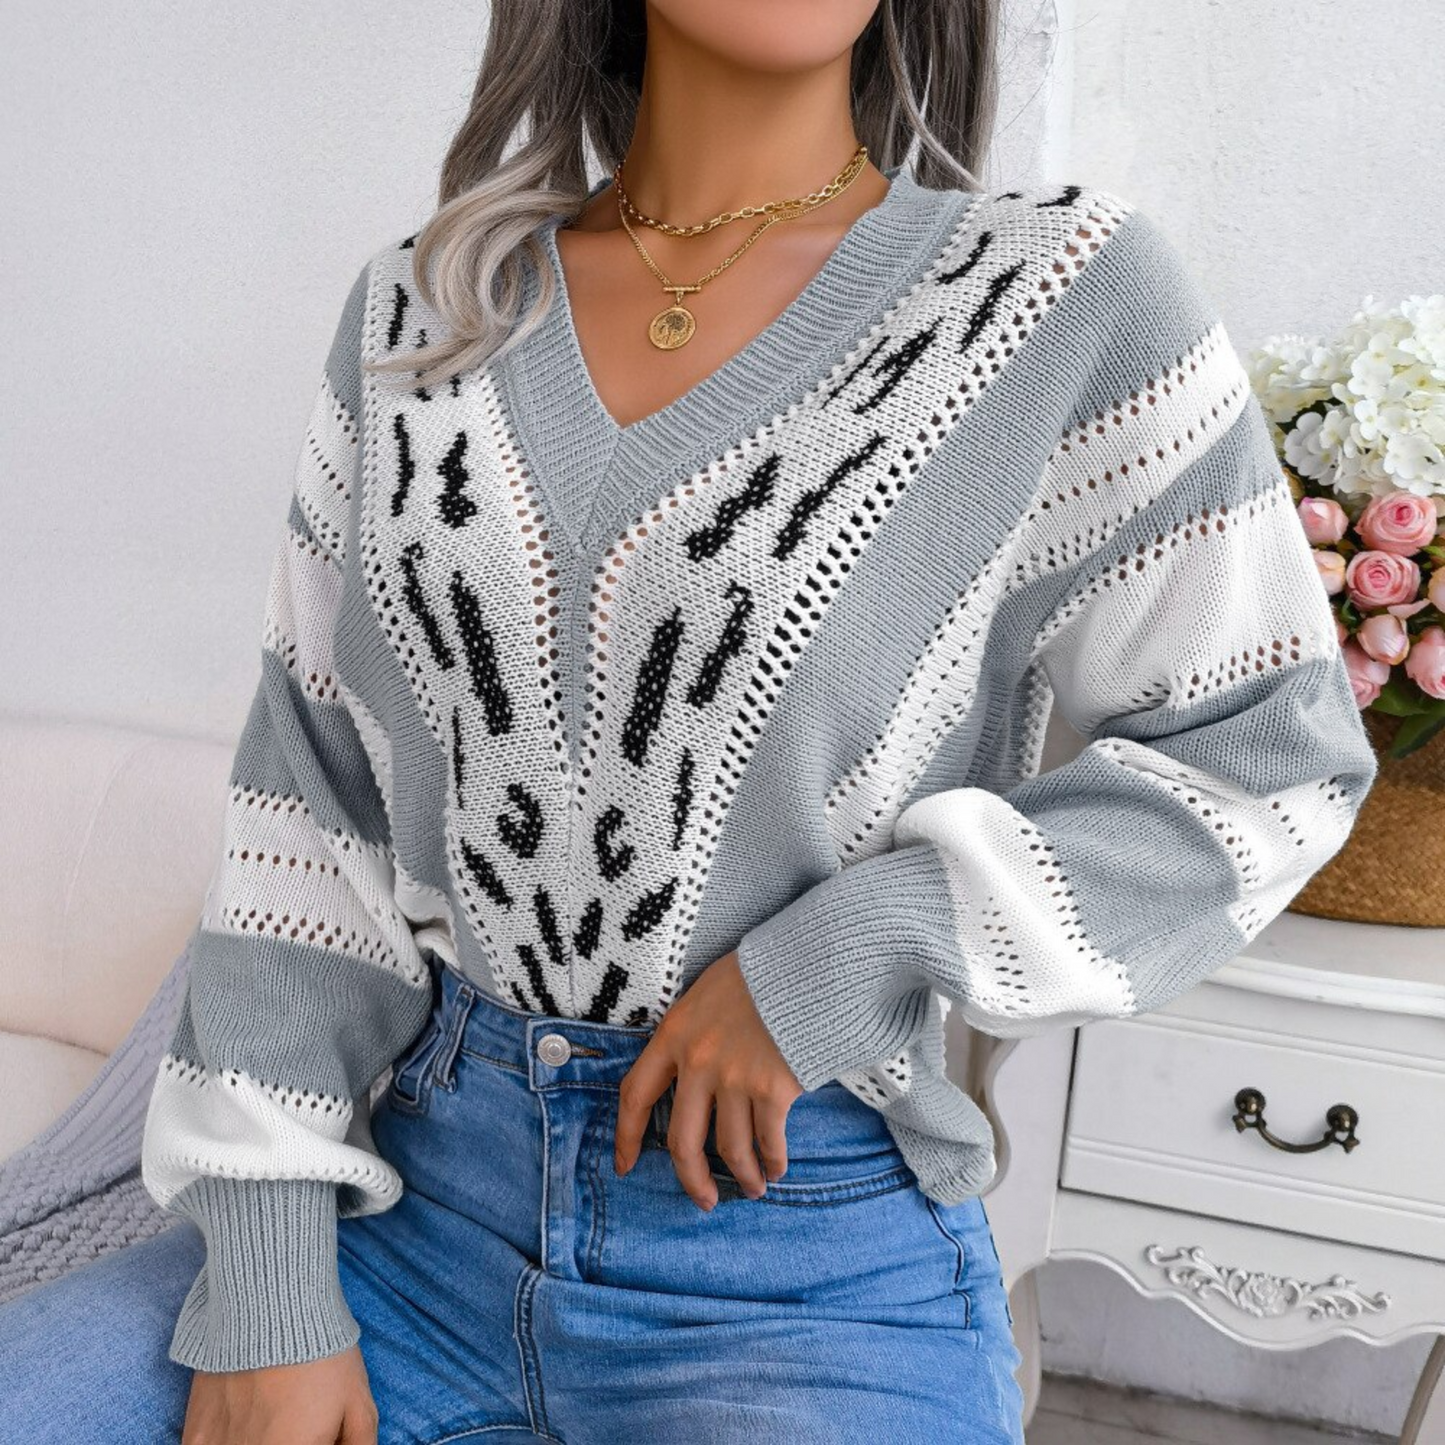 Harmony - Gray Knitted Leopard Print Paneled Sweater Top